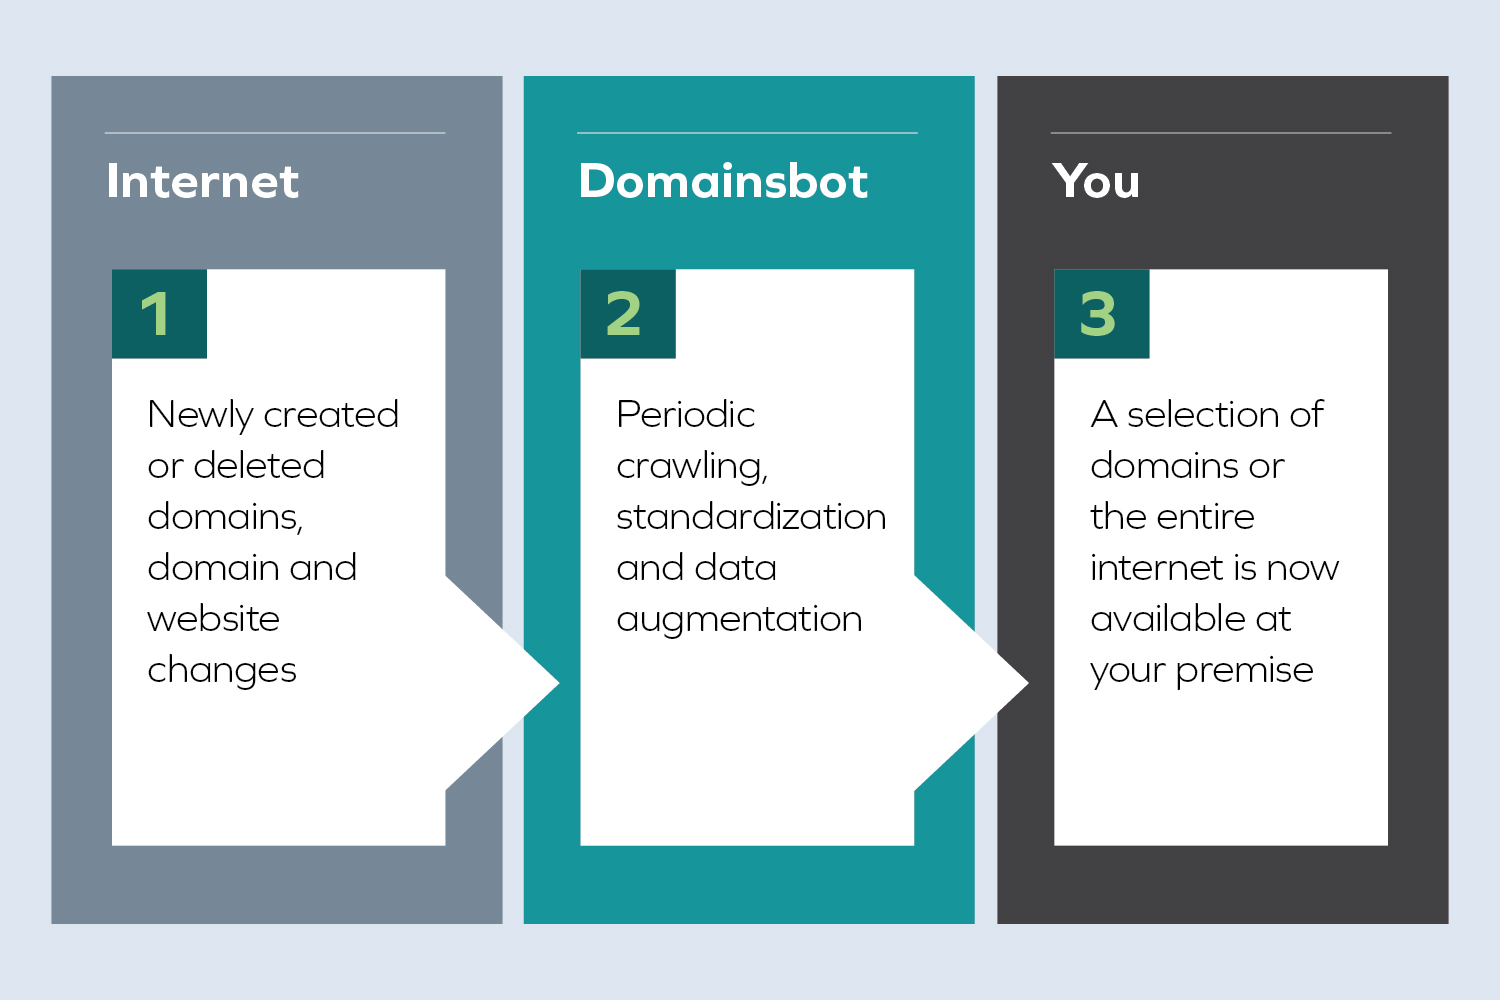 Data Provisioning Data Sync Diagram: 1) Internet: newly created or deleted domains, domain and website changes; 2) Domainsbot: peridic crawling, standardization and data augmentation; 3) You: a selection of domains or the entire internet is now at available at your premise. 